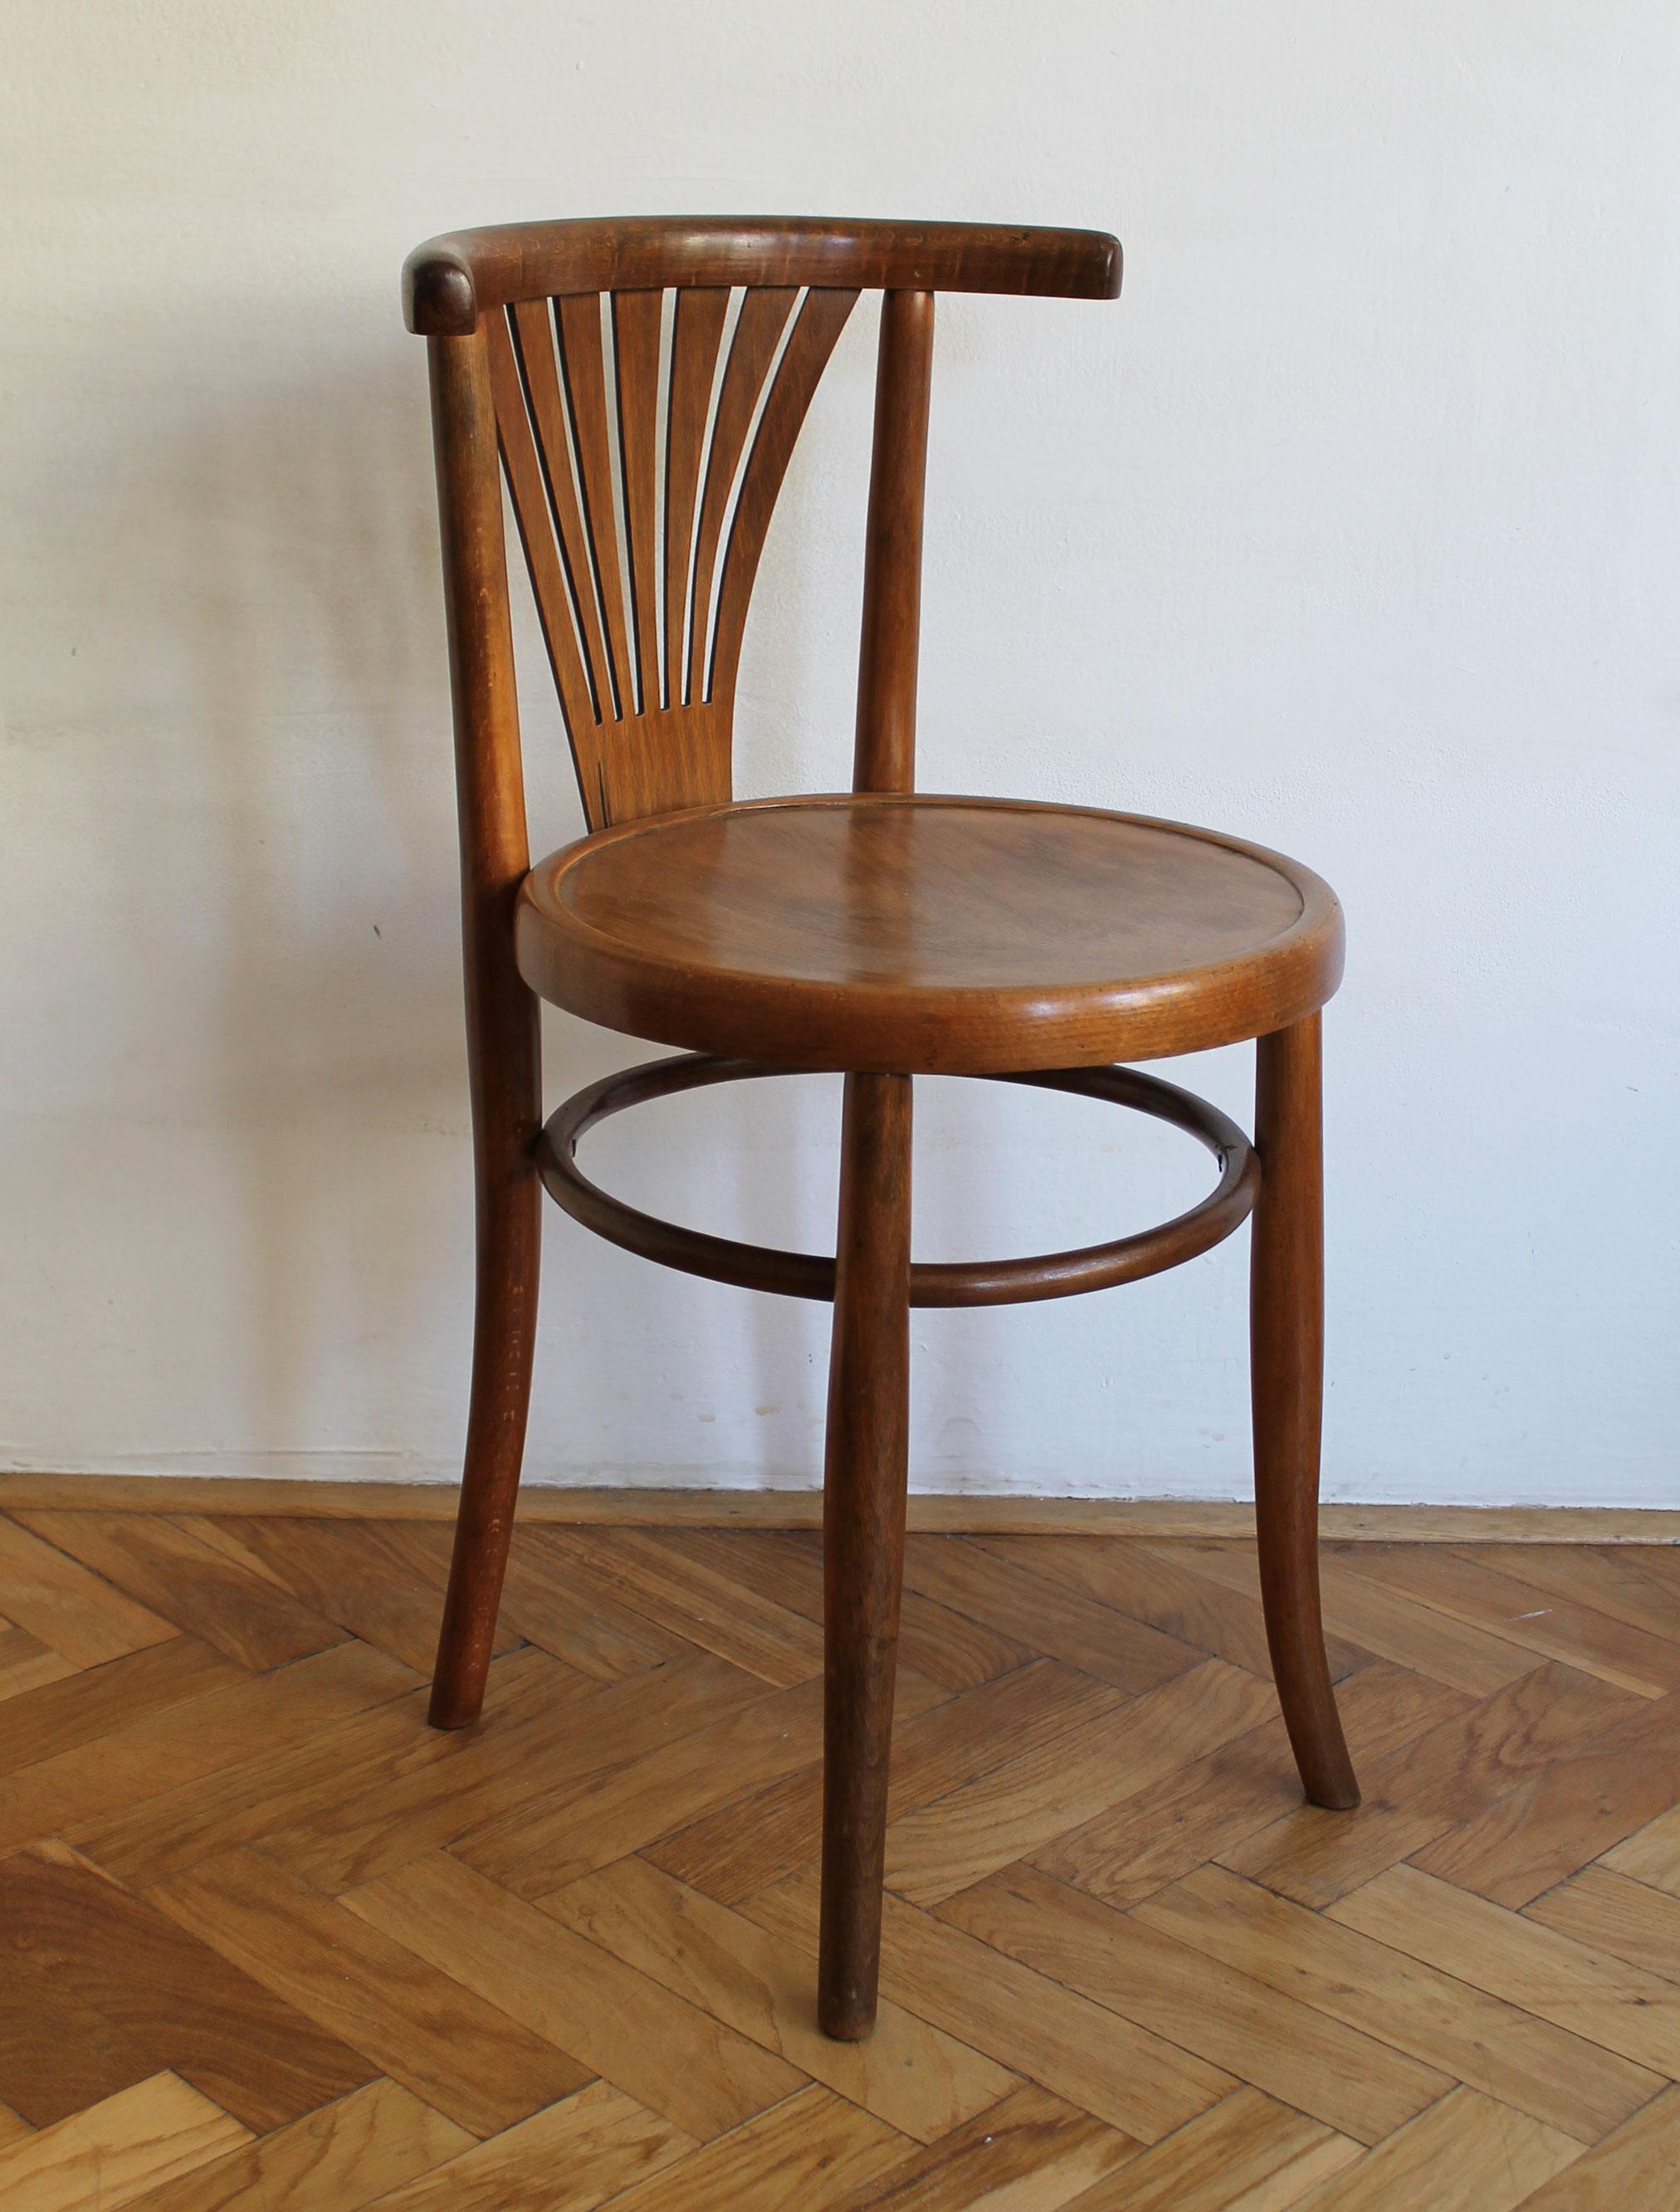 This is an original set of two dining chairs produced by Ungvar Furniture Company in Uzhorod. This factory was part of Austro-Hungarian Empire for a long time. By the time these chairs were produced, Uzhorod was part of Czechoslovakia (1918-1939)